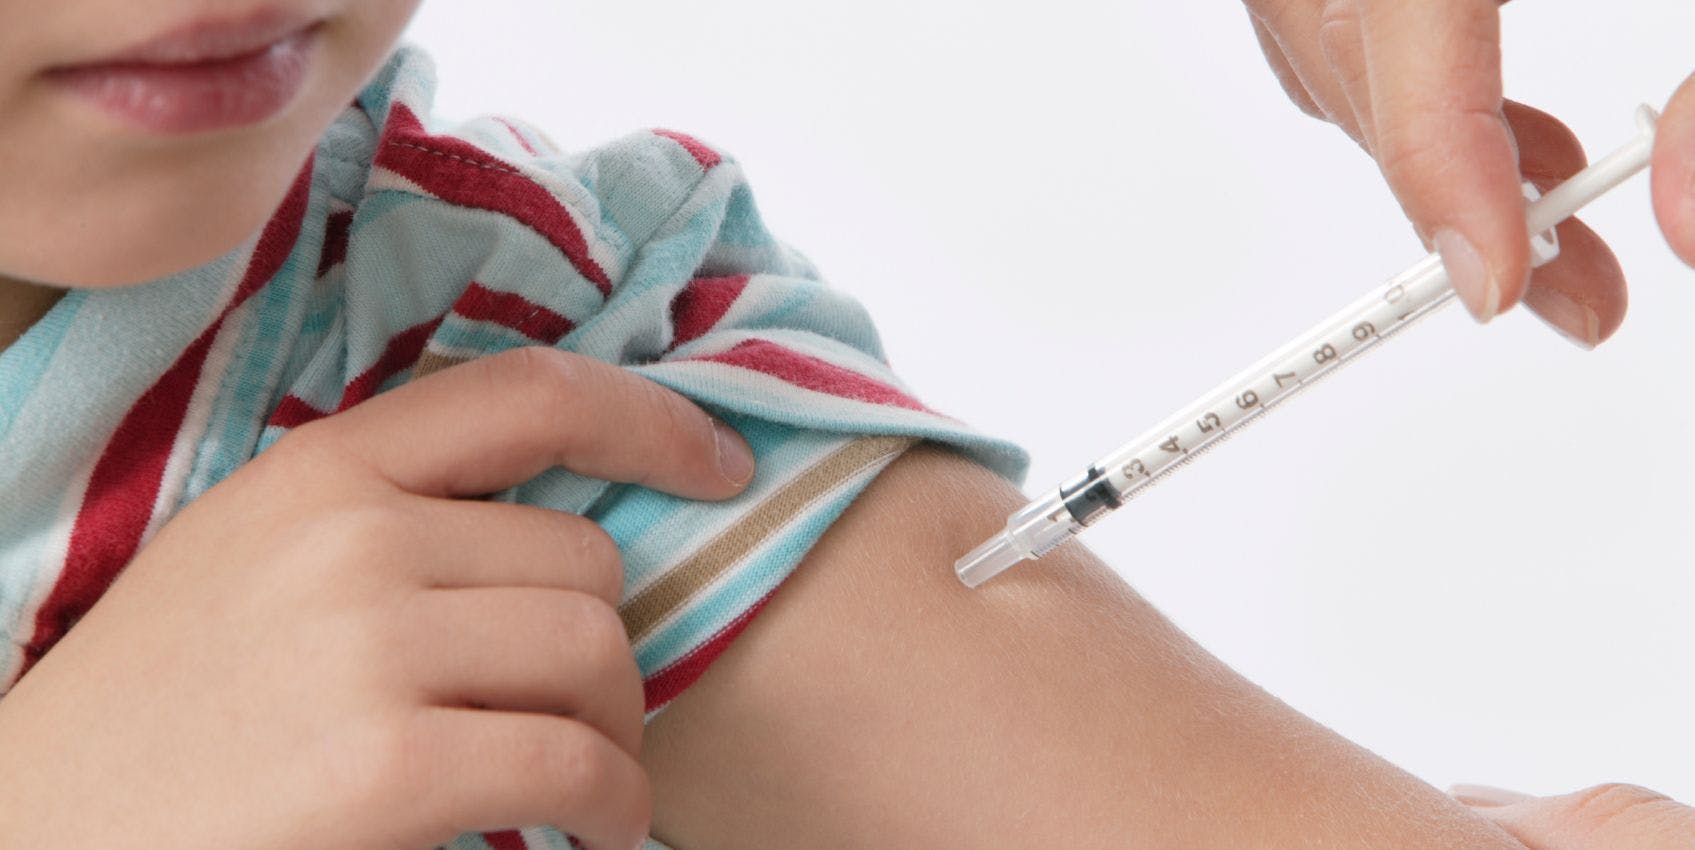 Despite Vaccine Controversy, Immunization Rates Remain High Among Young Children